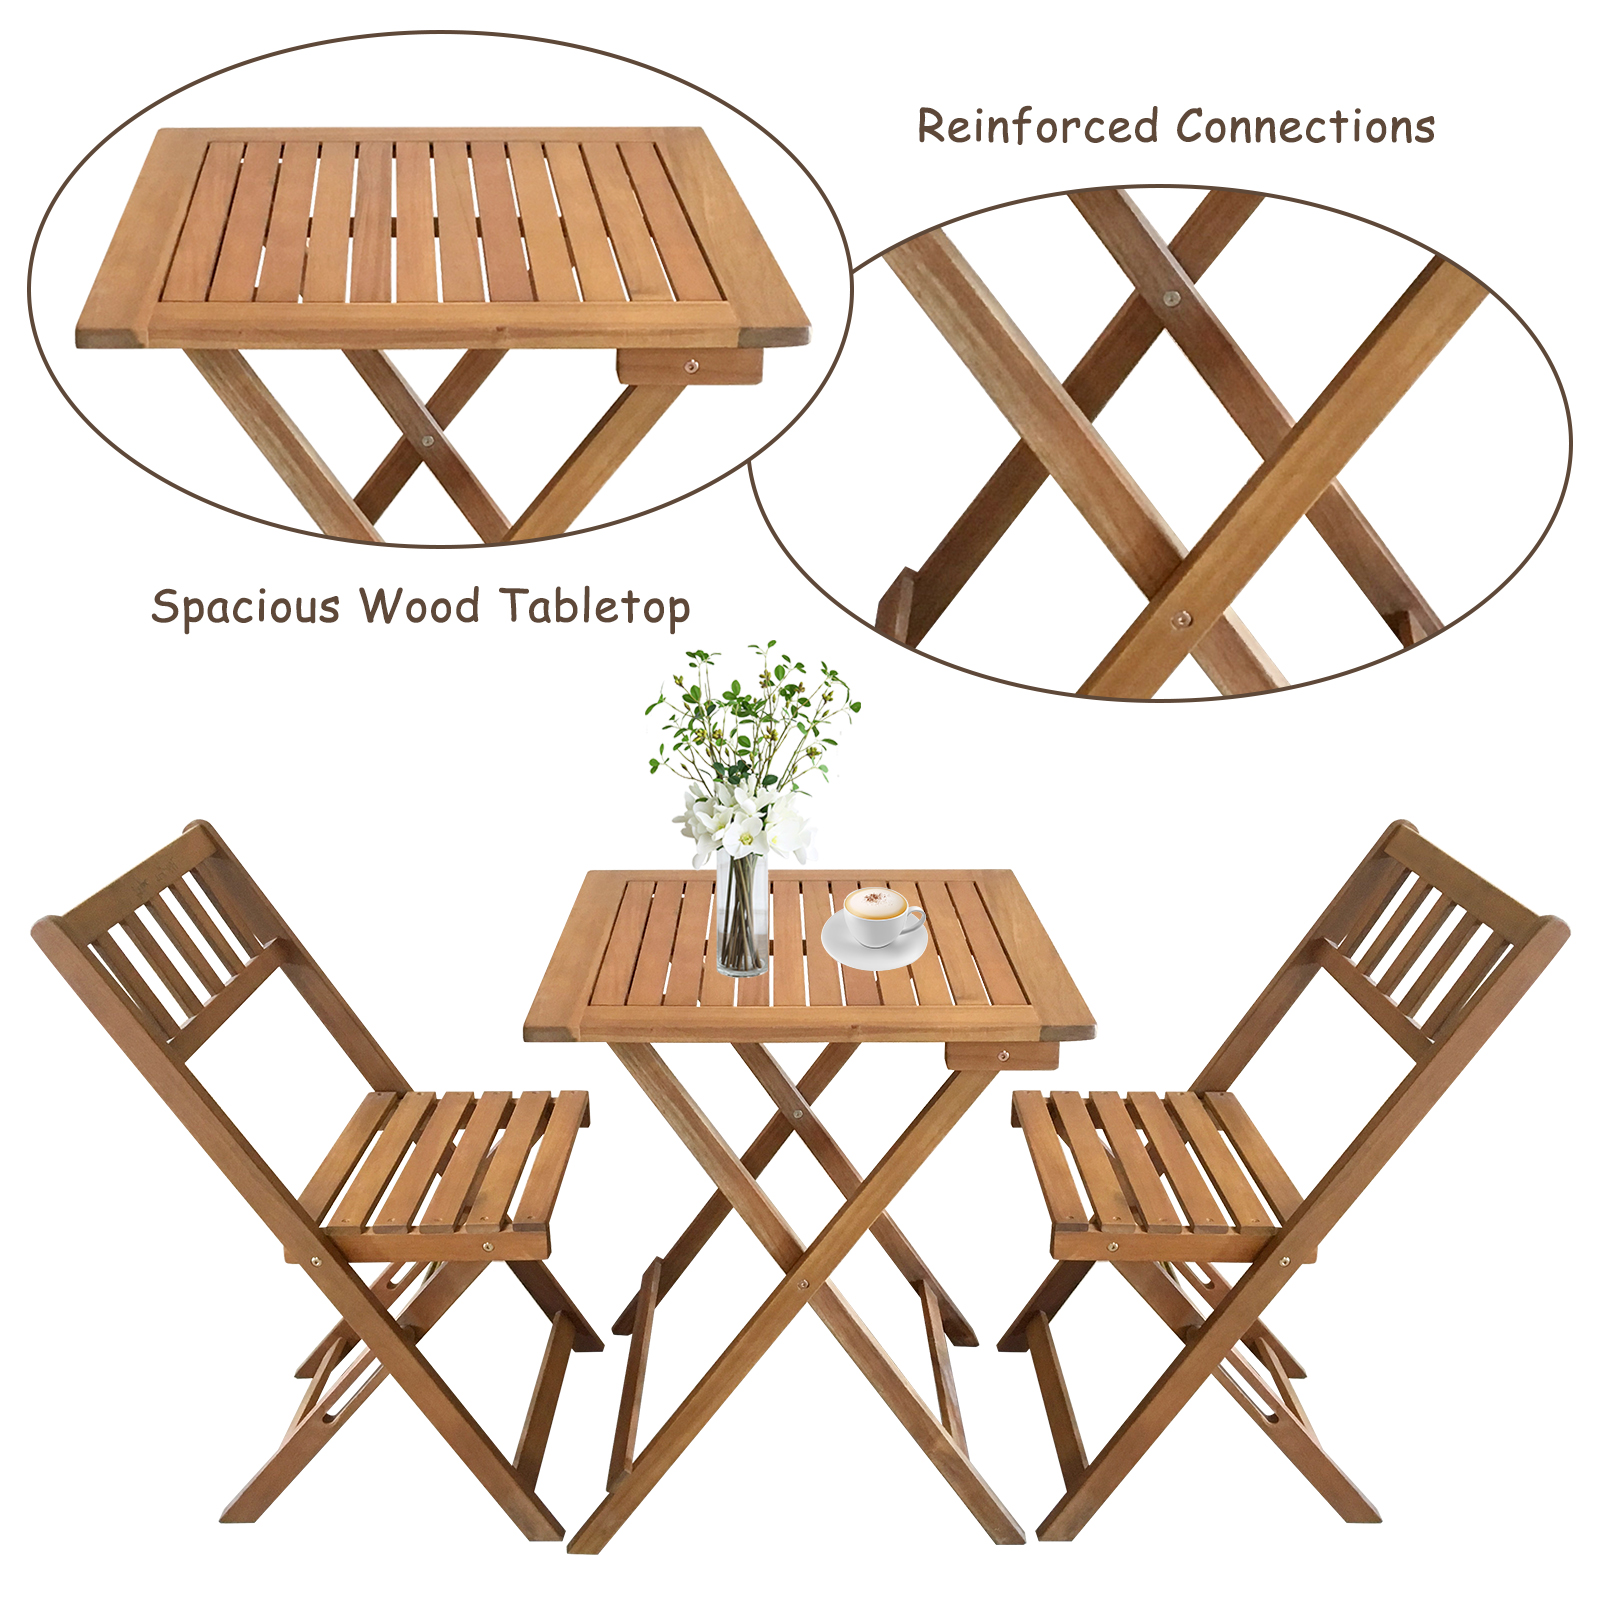 Folding Wooden Patio Bistro Set 3 Piece, Acacia Wood Outdoor Bistro Set Table and Chairs Set Wooden Furniture with 2 Chairs and Square Table for Pool Beach Backyard Balcony Porch Deck Garden - image 3 of 7